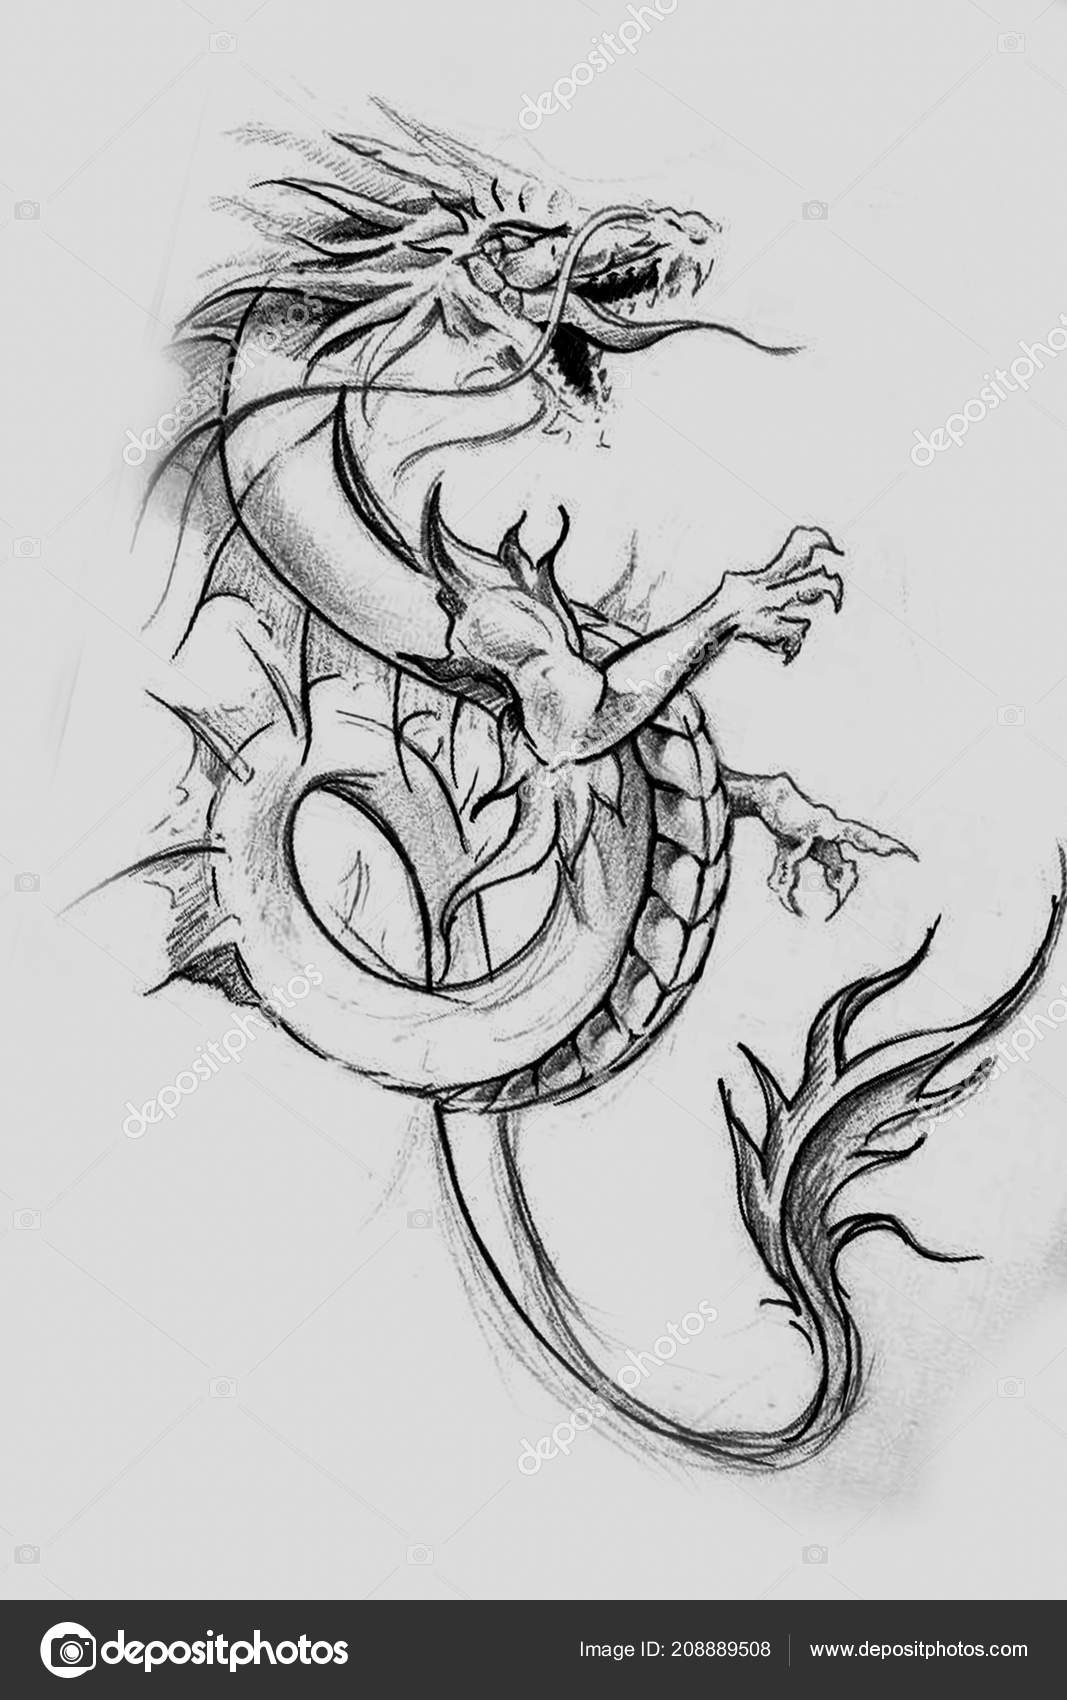 Tattoo Sketch Handmade Design Vintage Paper Stock Photo by ©outsiderzone  208889508